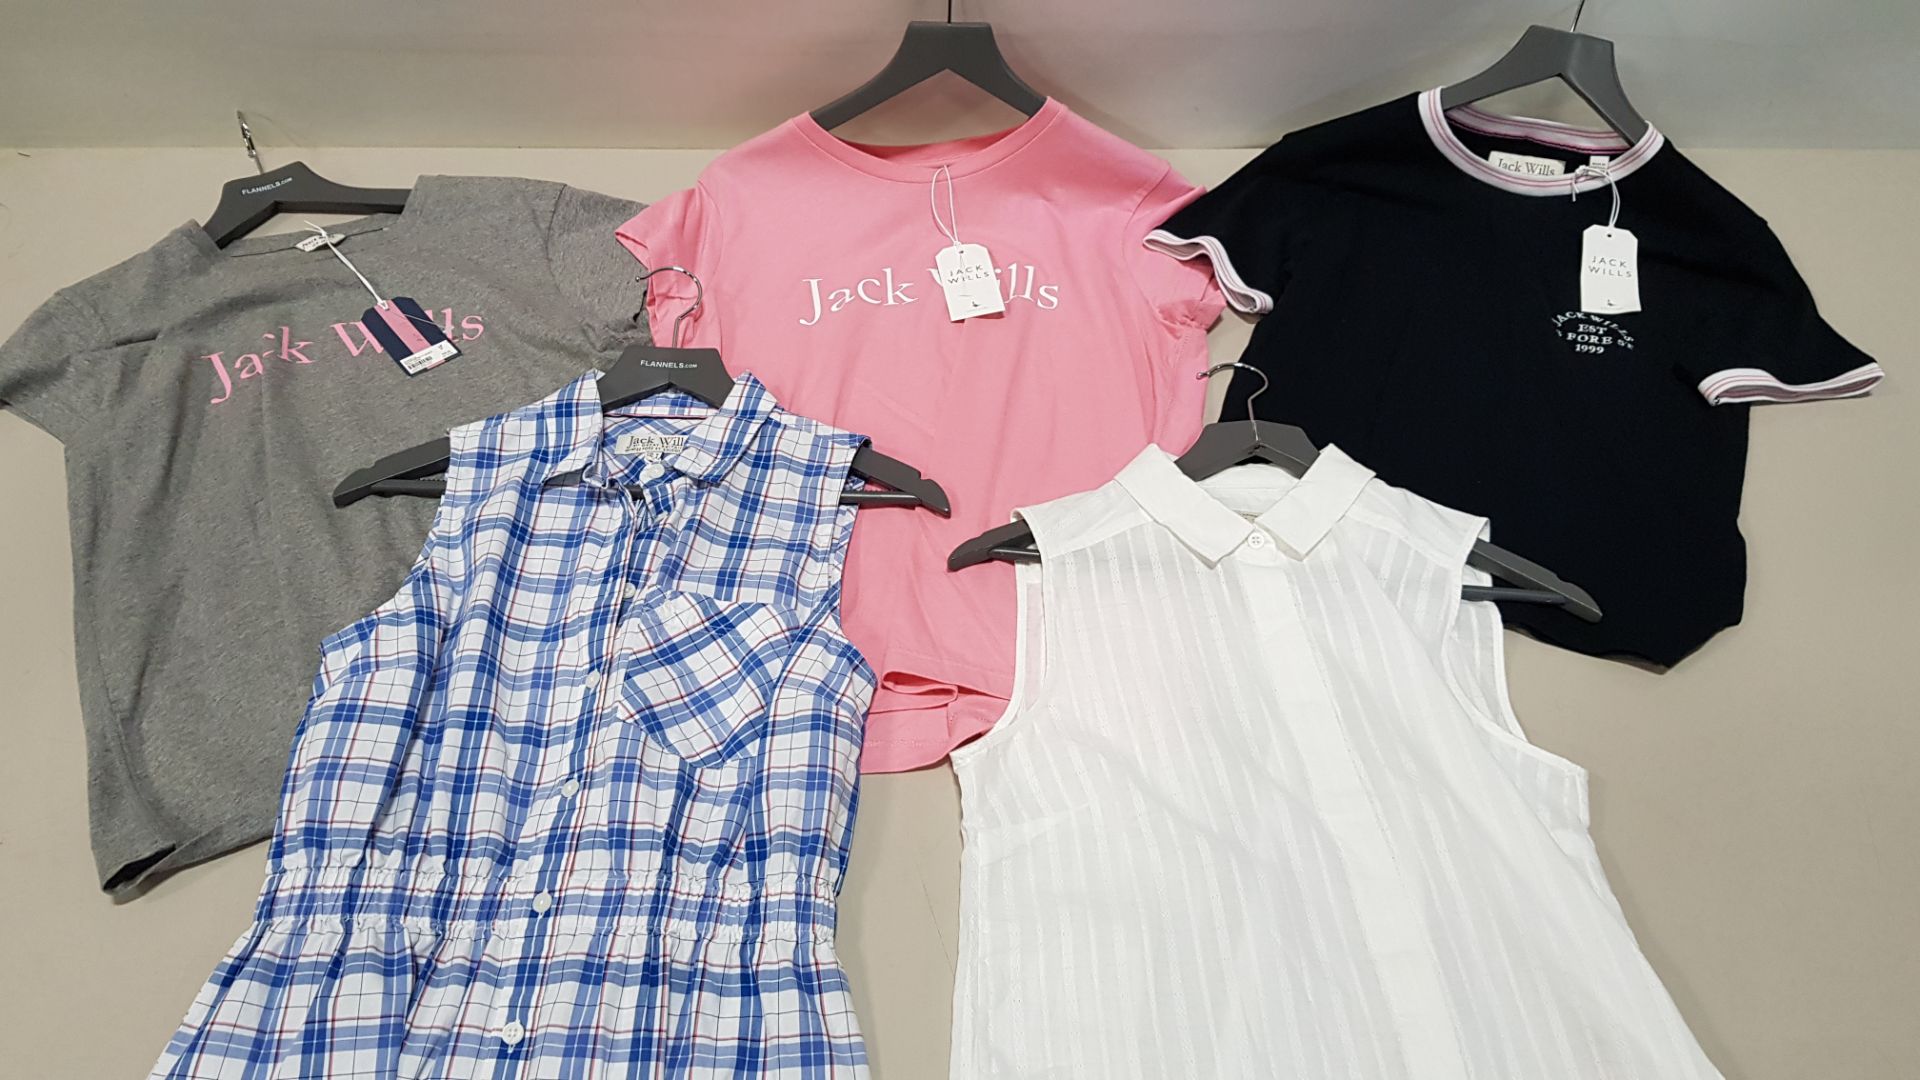 10 PIECE MIXED JACK WILLS CLOTHING LOT CONTAINING JACK WILLS DRESSES, JACK WILLS SHIRT VEST AND JACK